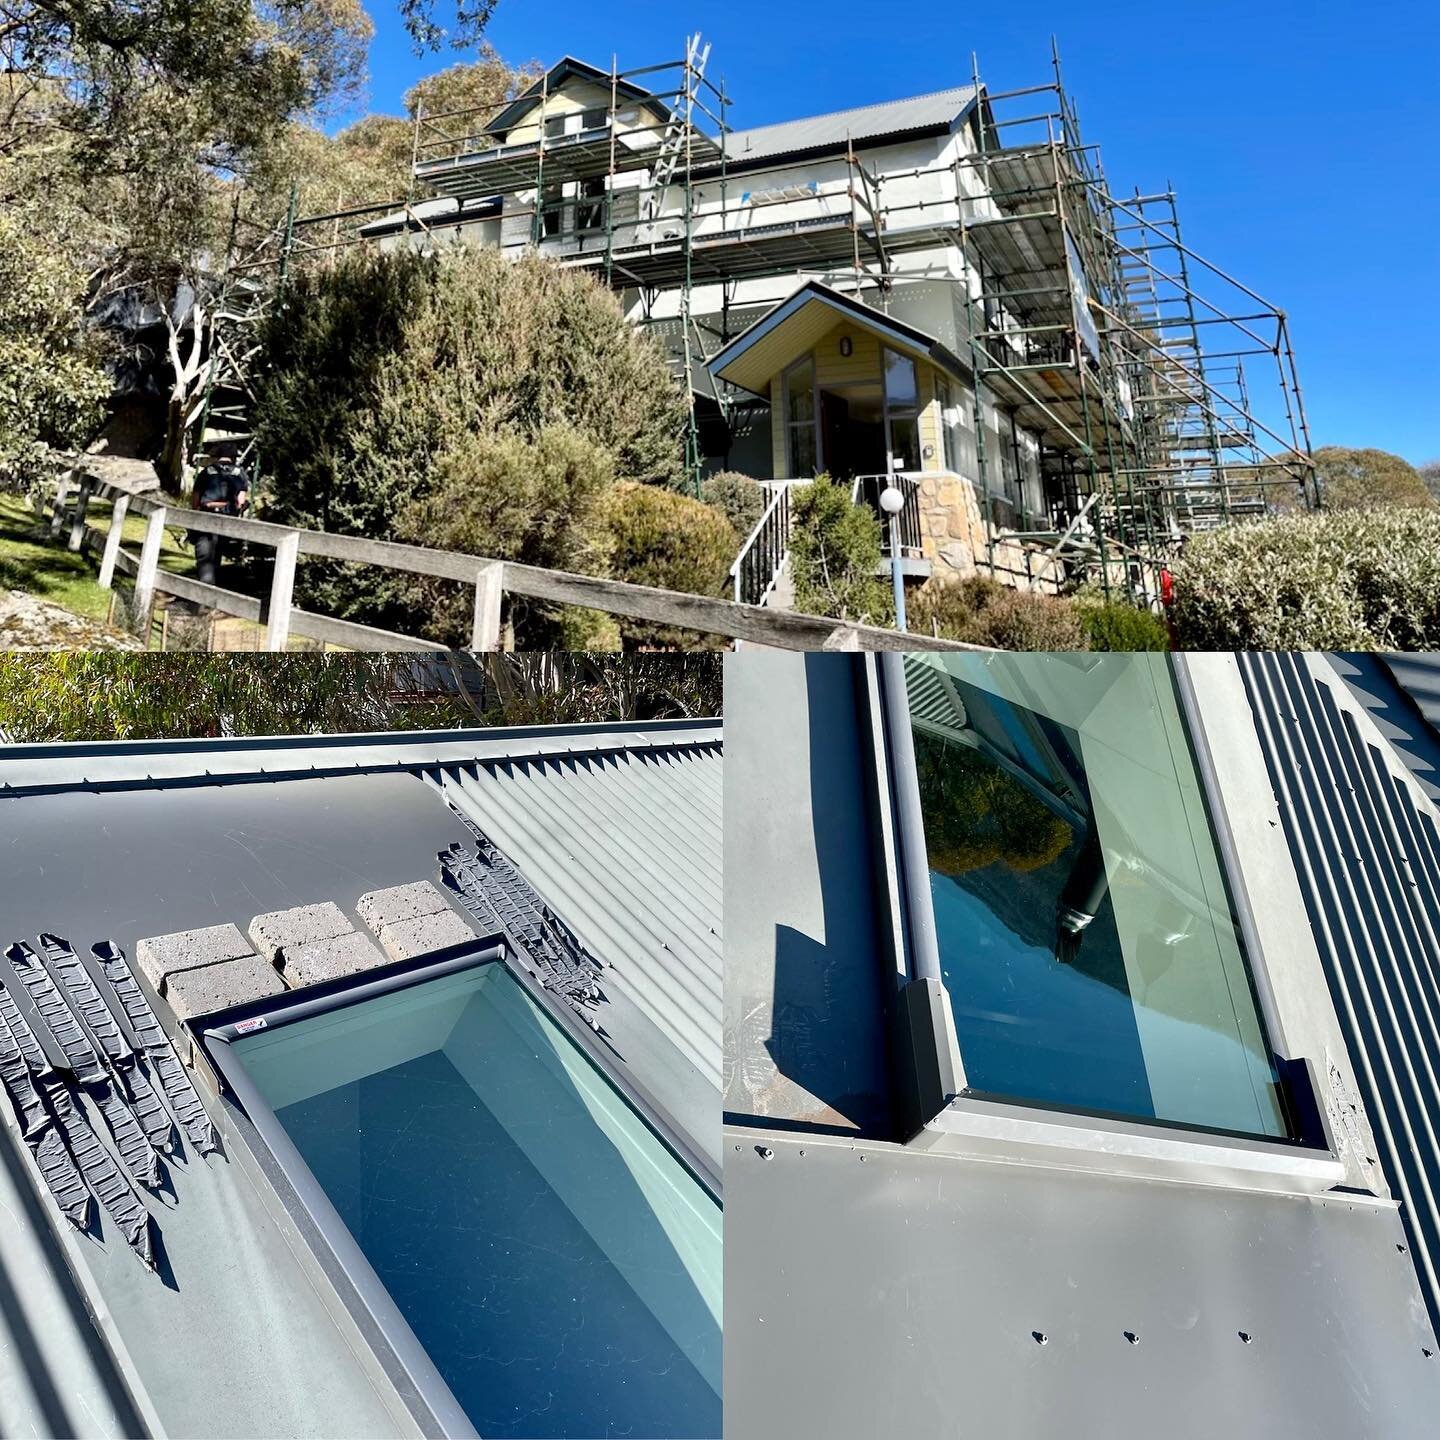 Before and after much needed window improvements #villagegreen #thredbo #itsnearlywinter